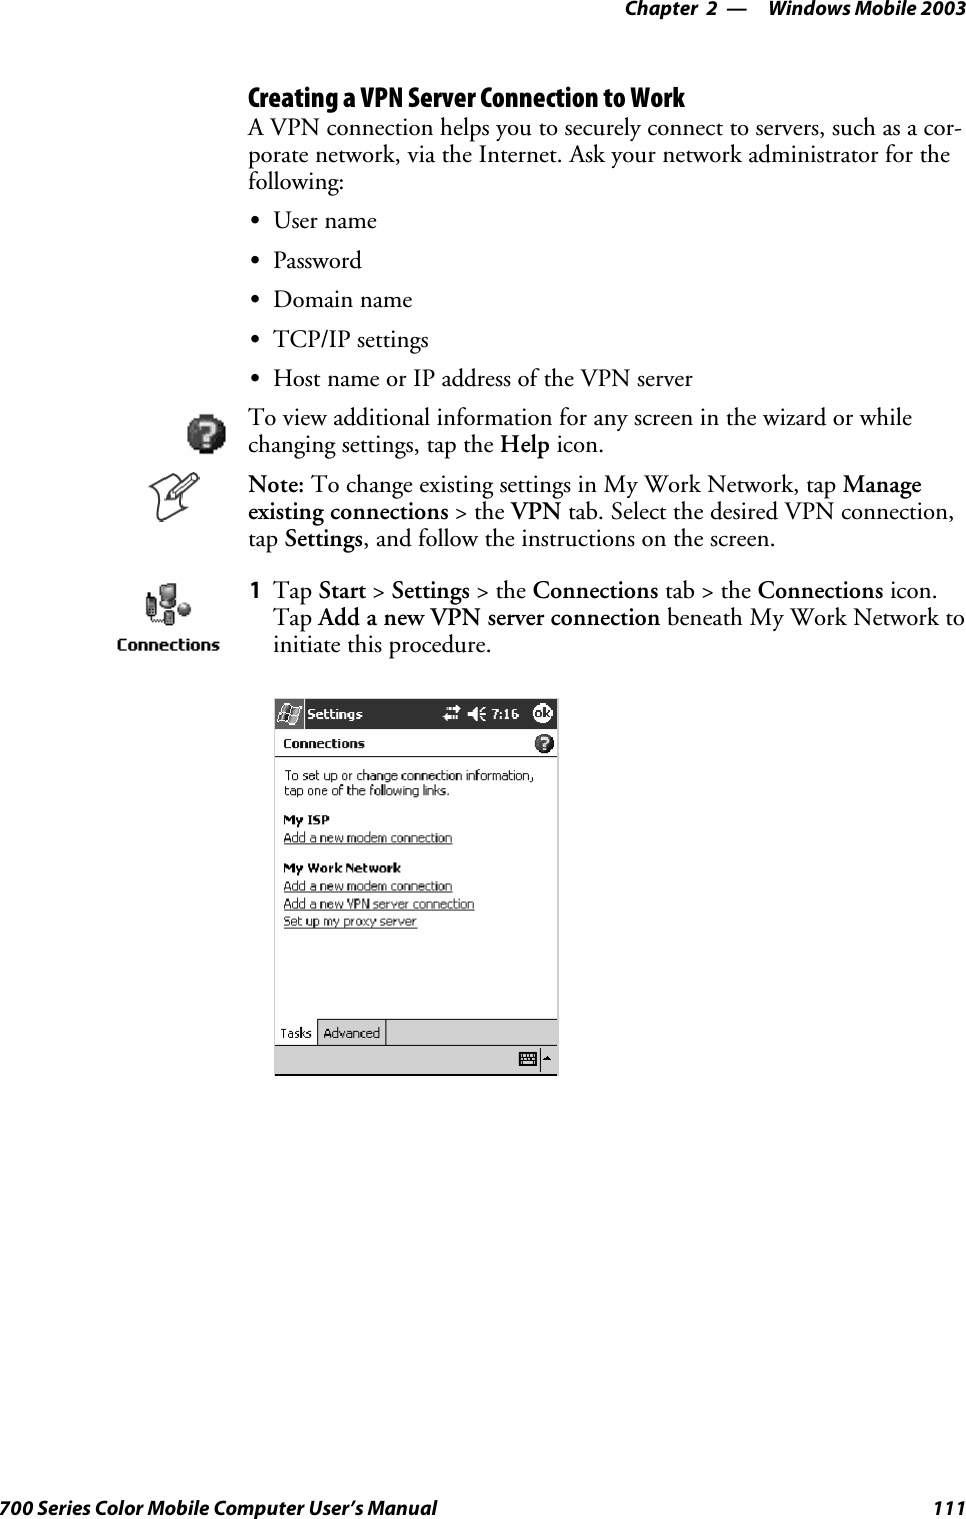 Windows Mobile 2003—Chapter 2111700 Series Color Mobile Computer User’s ManualCreating a VPN Server Connection to WorkA VPN connection helps you to securely connect to servers, such as a cor-porate network, via the Internet. Ask your network administrator for thefollowing:SUser nameSPasswordSDomain nameSTCP/IP settingsSHost name or IP address of the VPN serverTo view additional information for any screen in the wizard or whilechanging settings, tap the Help icon.Note: To change existing settings in My Work Network, tap Manageexisting connections &gt;theVPN tab. Select the desired VPN connection,tap Settings, and follow the instructions on the screen.1Tap Start &gt;Settings &gt;theConnections tab&gt;theConnections icon.Tap Add a new VPN server connection beneath My Work Network toinitiate this procedure.